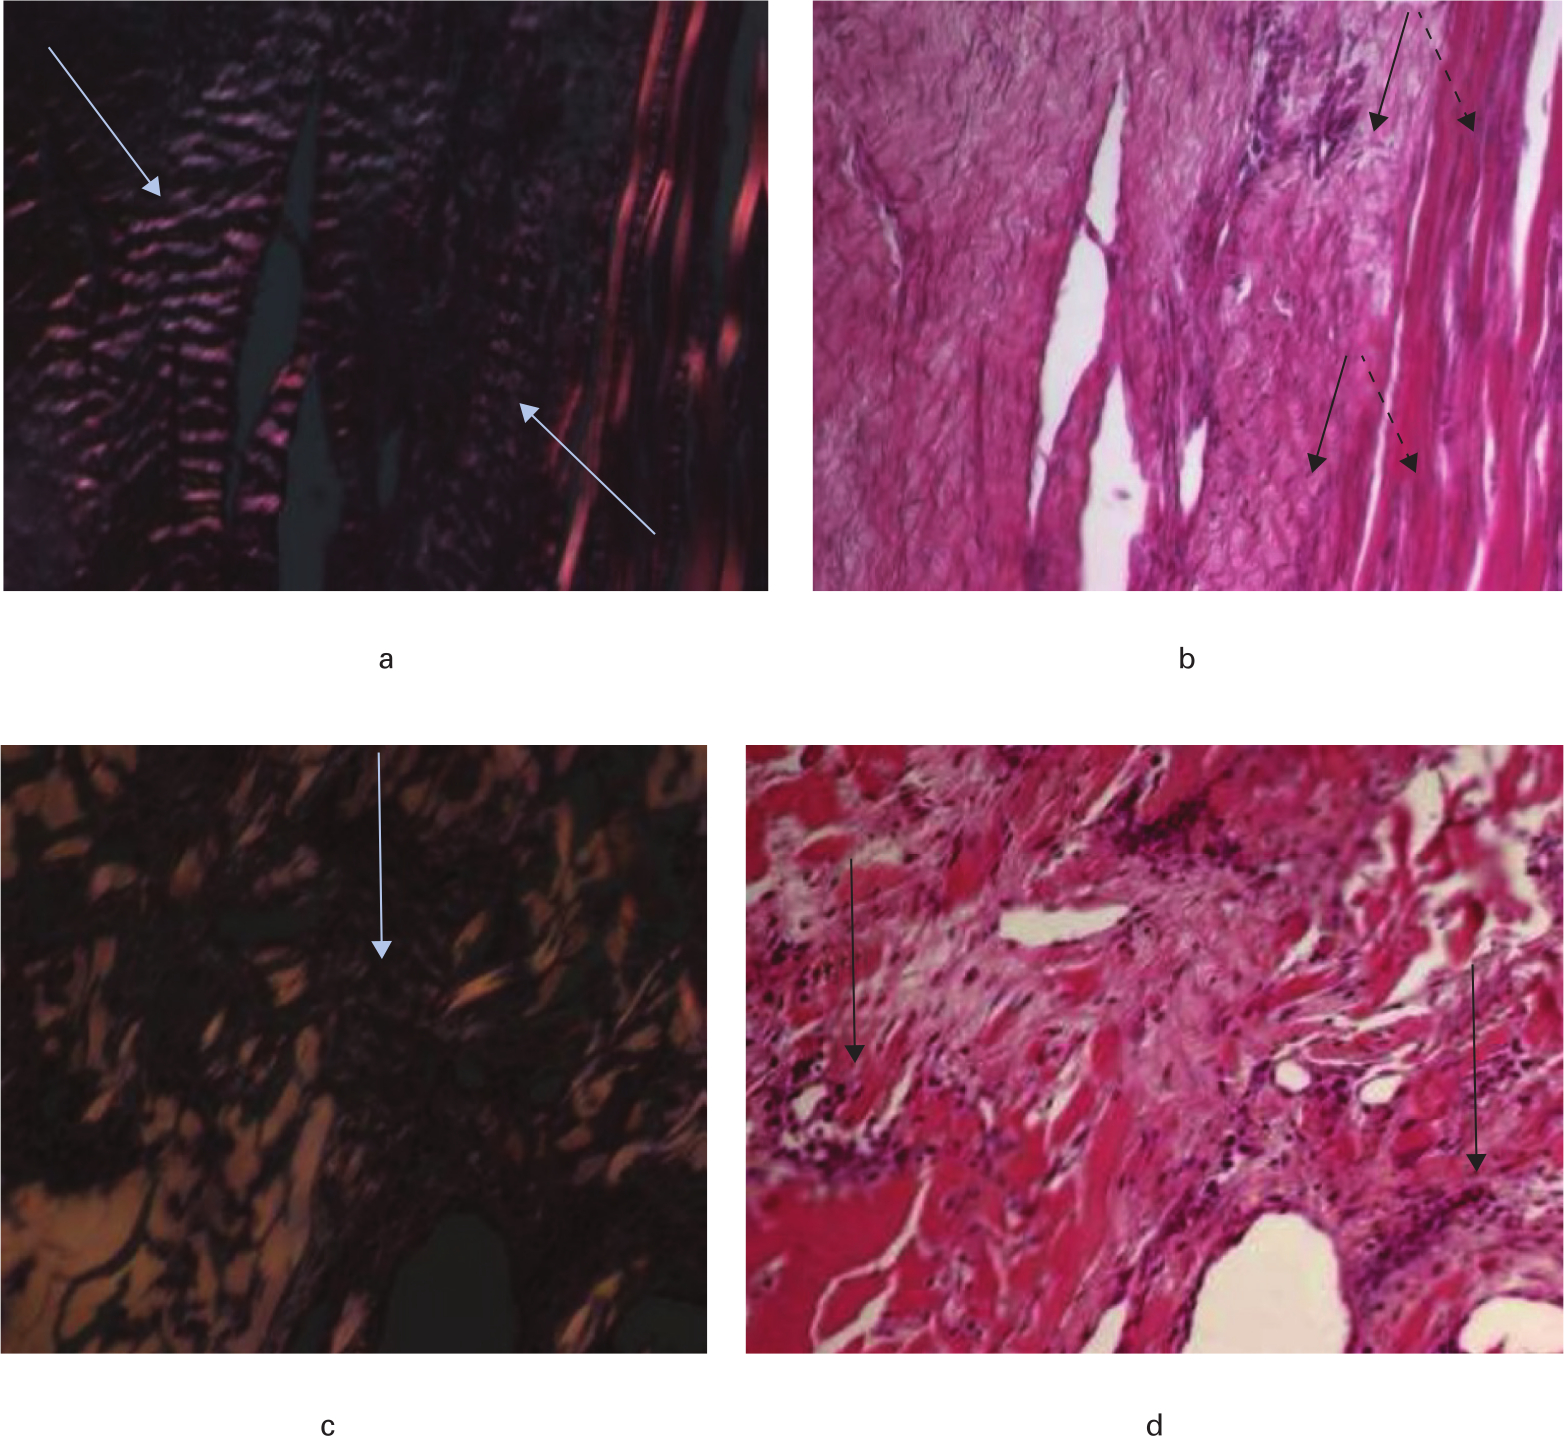 Fig. 7 
            Histological appearance of the intra-articular graft at 200× magnification. a) In the Endobutton group under polarized light, clear evidence of ligament-like crimped collagenous tissue is seen (arrow); b) in the Endobutton group using light microscopy an intimate association between new remodelled tissue (black arrow) and residual porcine tendon scaffold (dashed arrow) is observed; c) in the cross-pin group under polarized light, relatively little crimp-like organization (arrow) is seen; d) in the cross-pin group using light microscopy, highly cellular regions (arrow) were observed (stained with Toluidine Blue and Paragon).
          